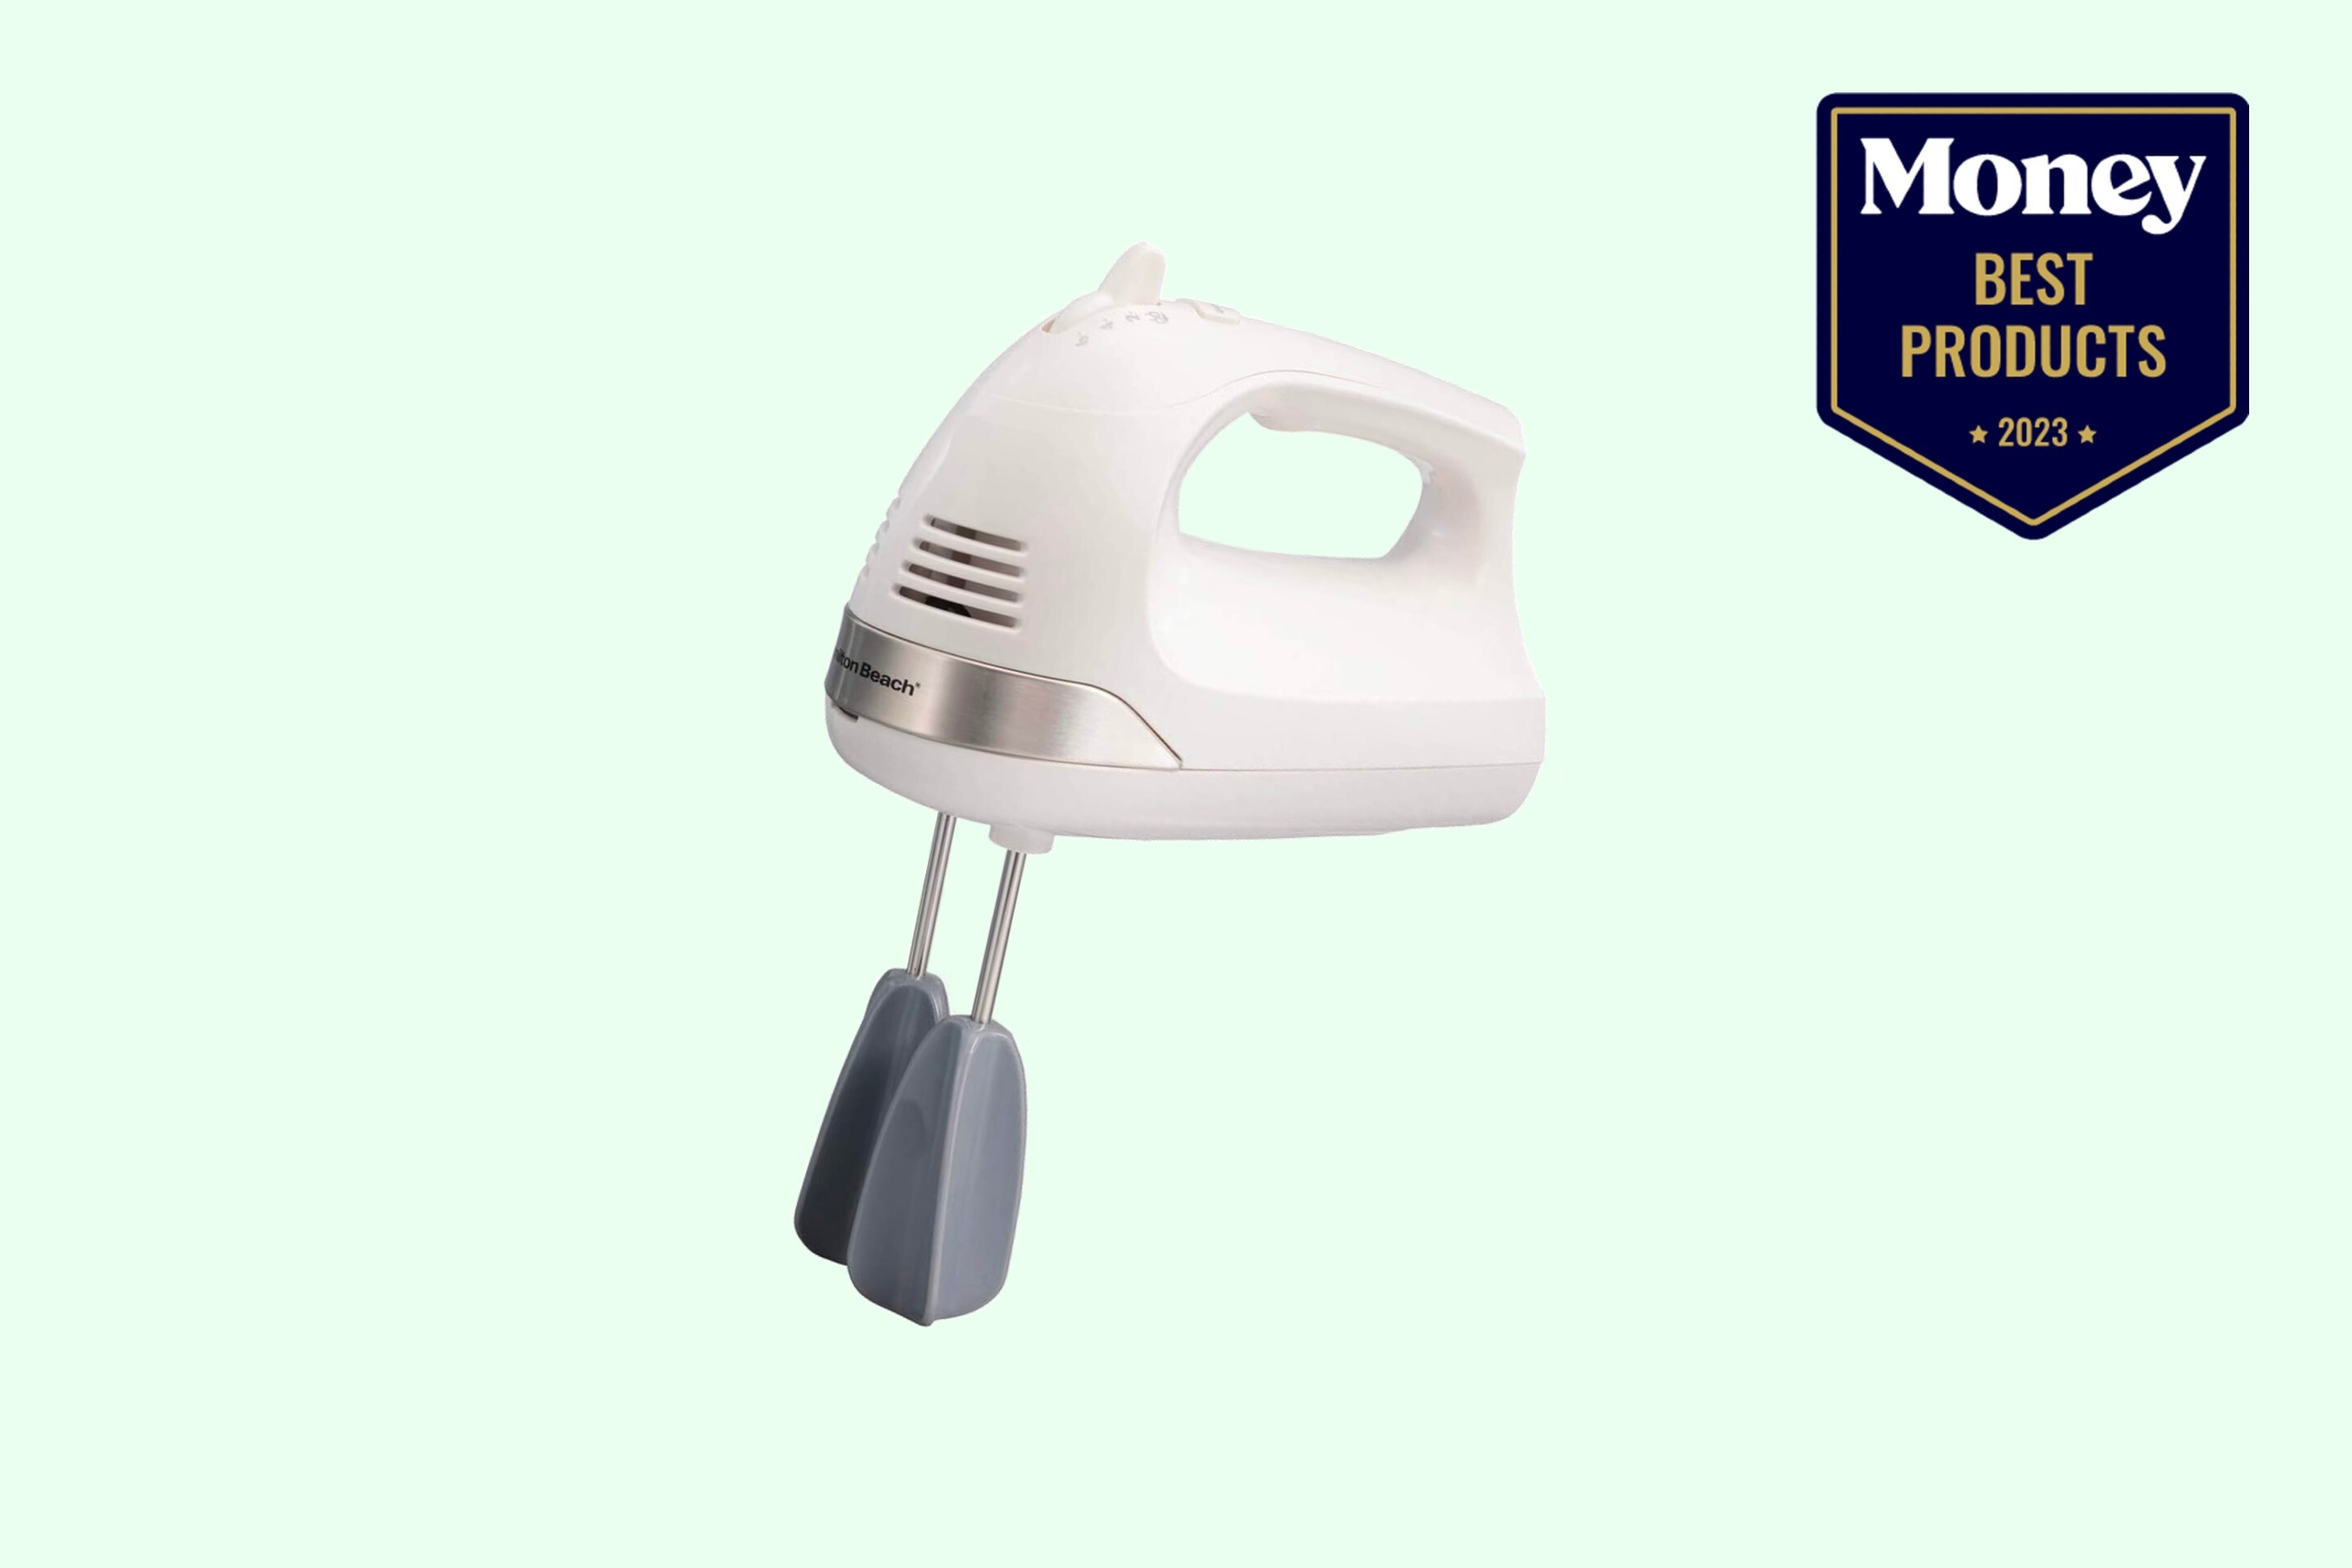 Hamilton Beach Soft Scrape Hand Mixer Review and Giveaway